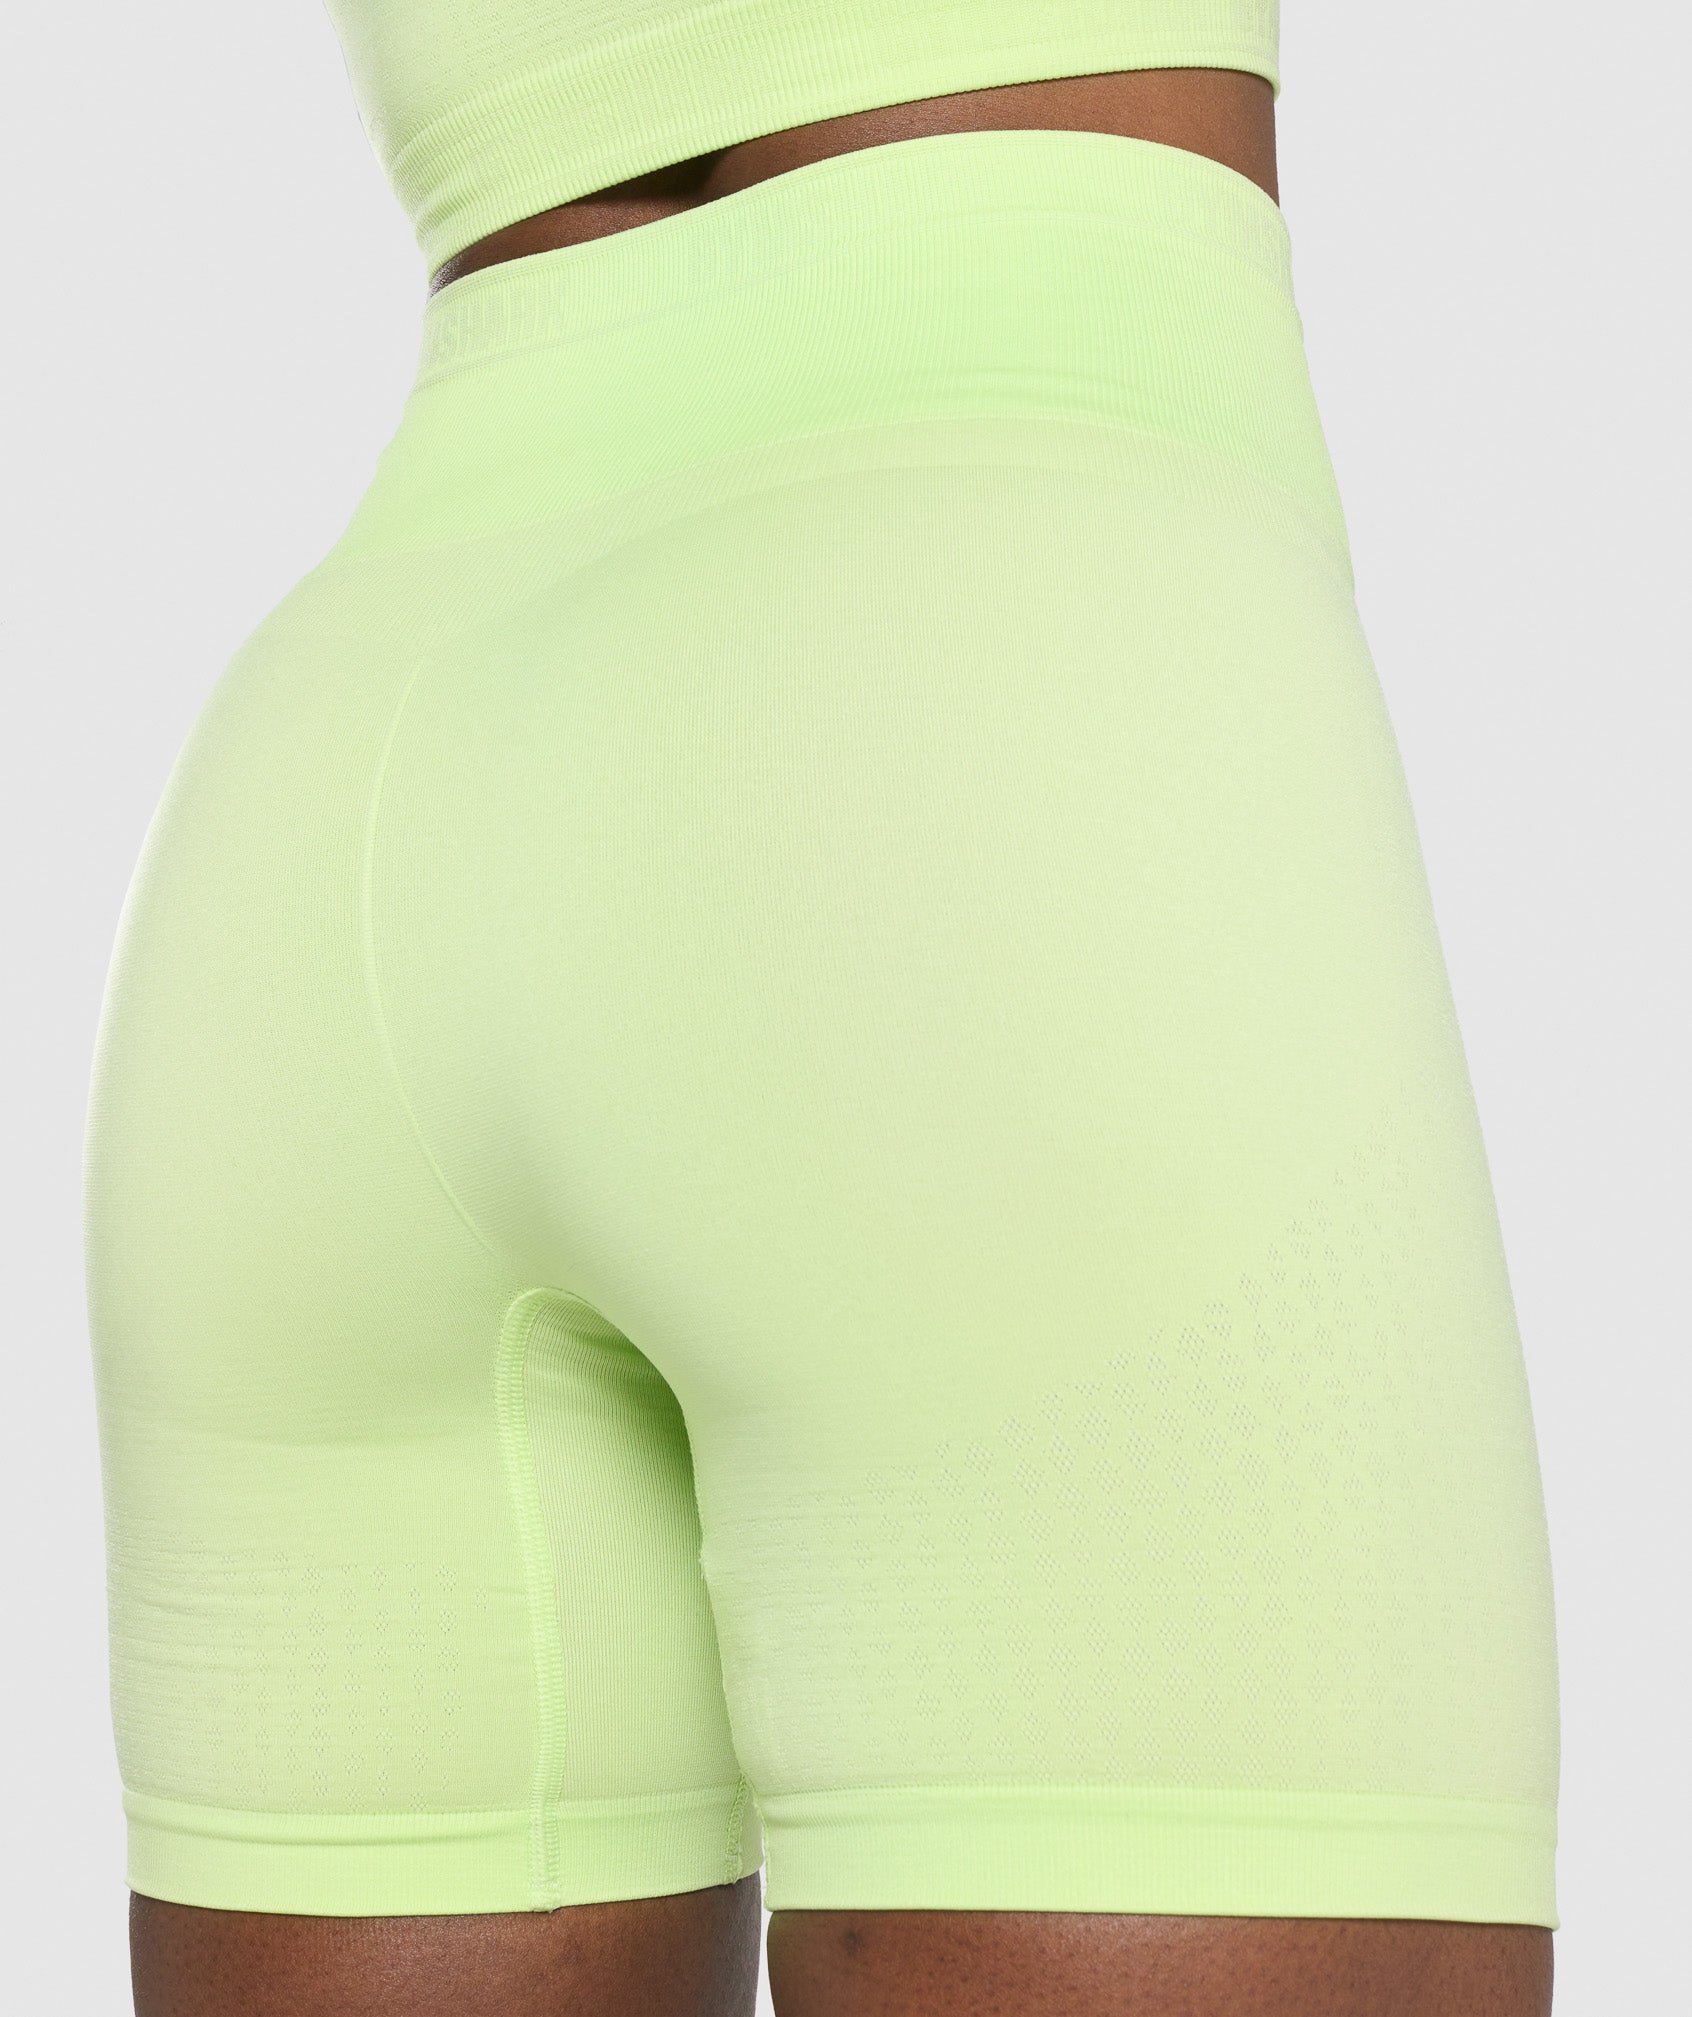 Apex Seamless Shorts in Green/Light Green - view 5